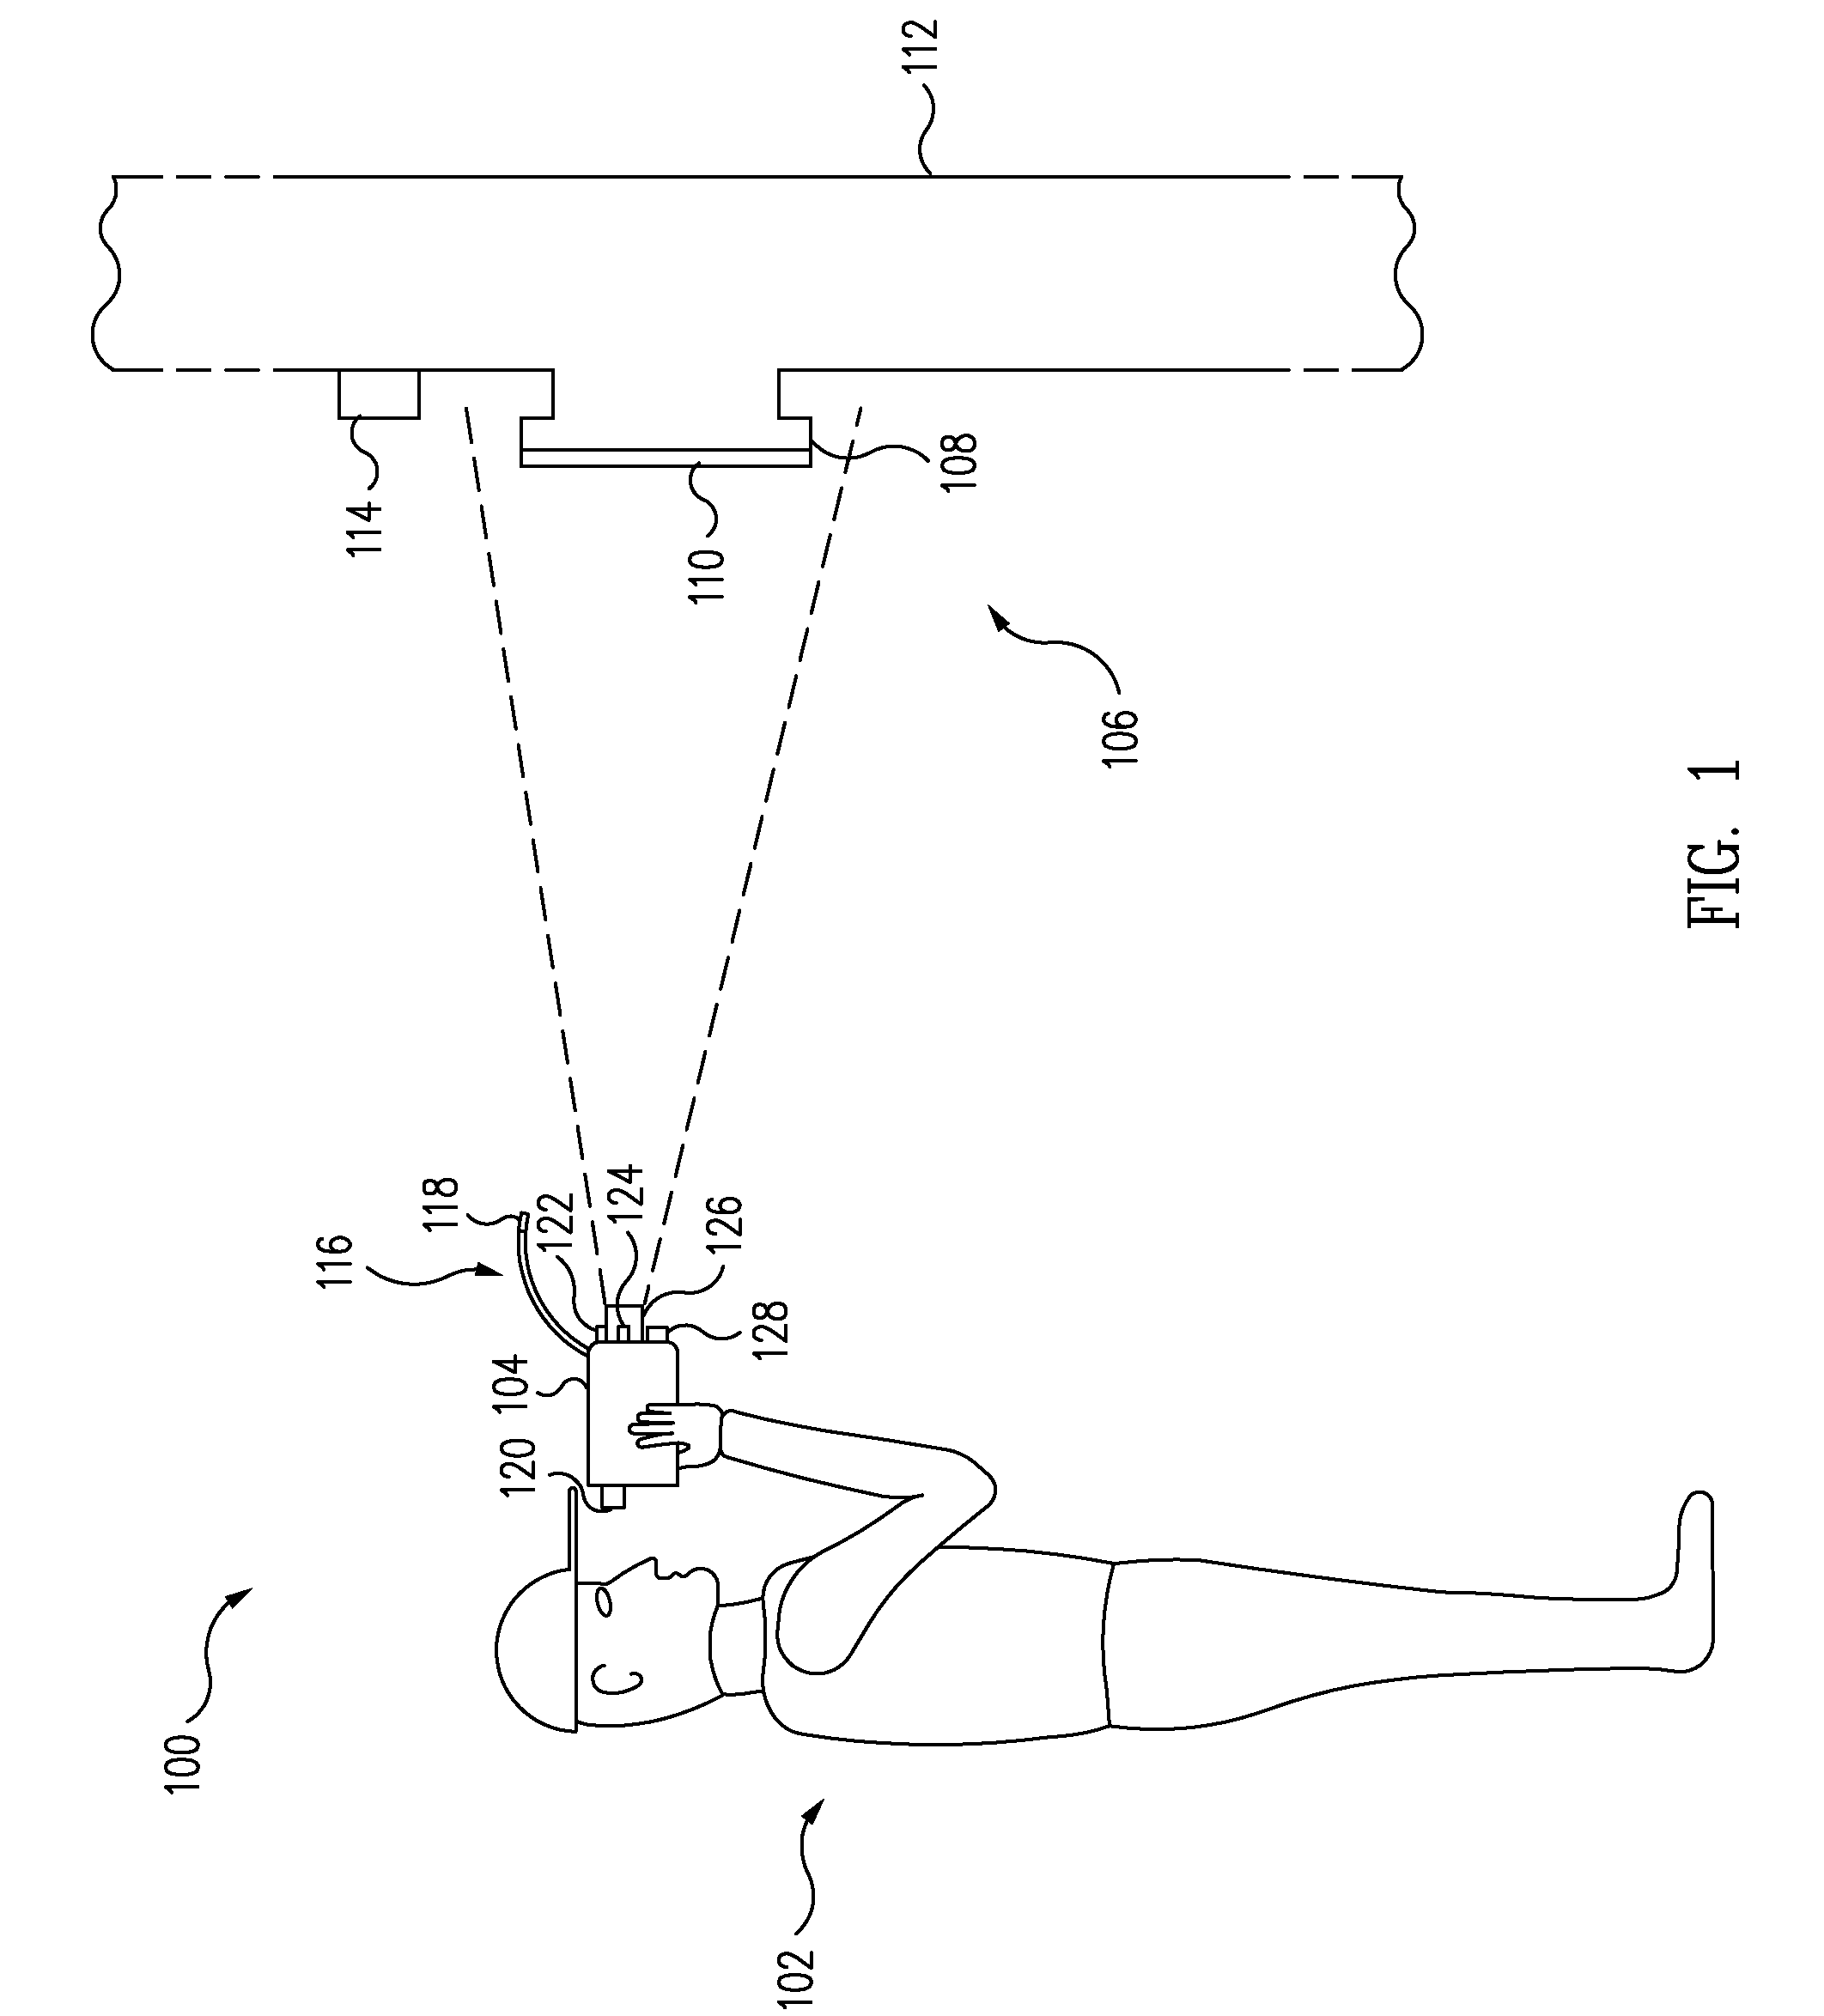 Portable multi-function inspection systems and methods